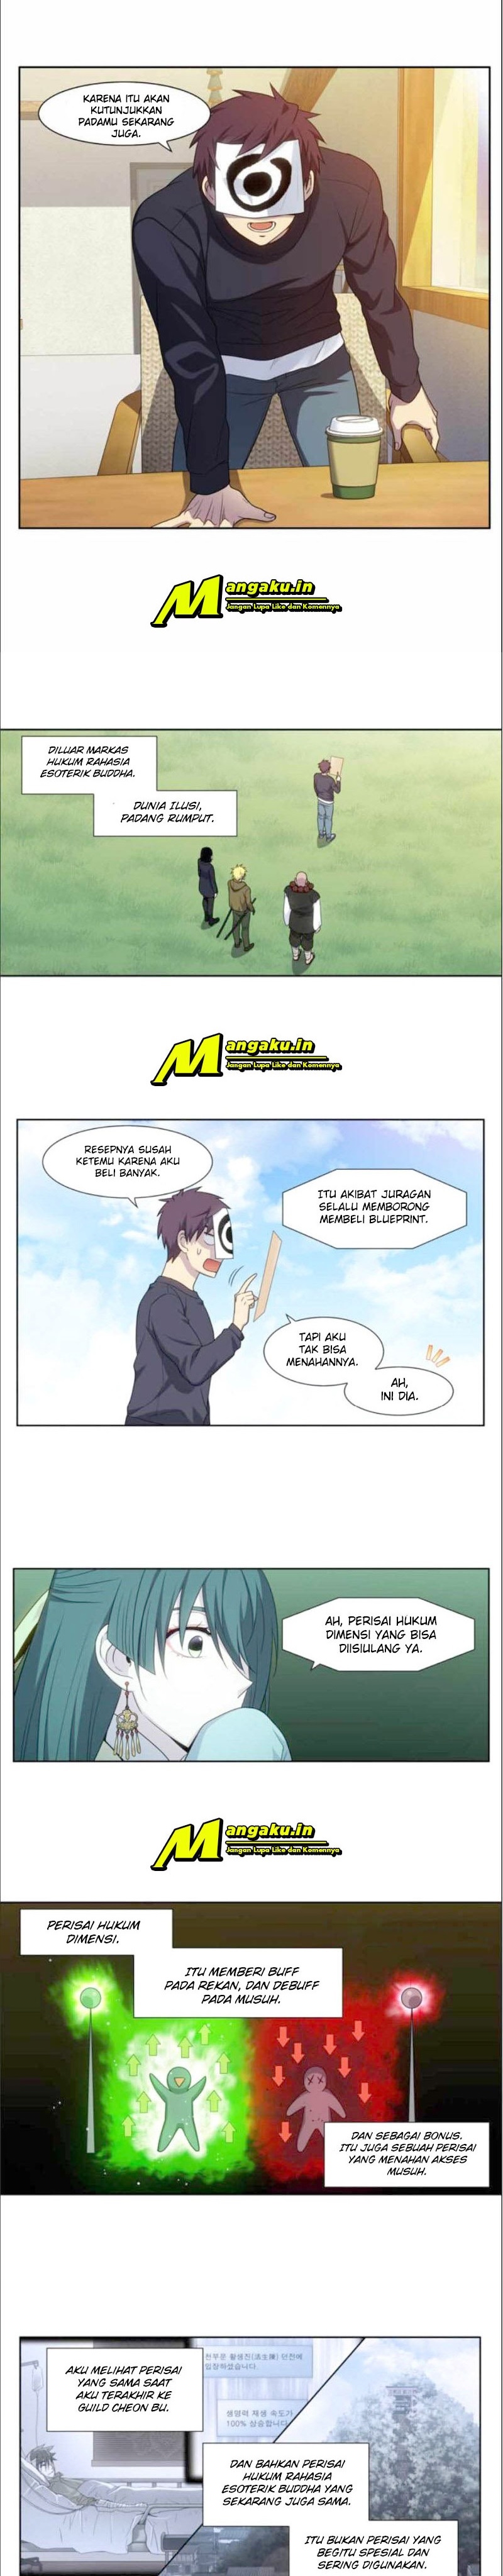 The Gamer Chapter 418